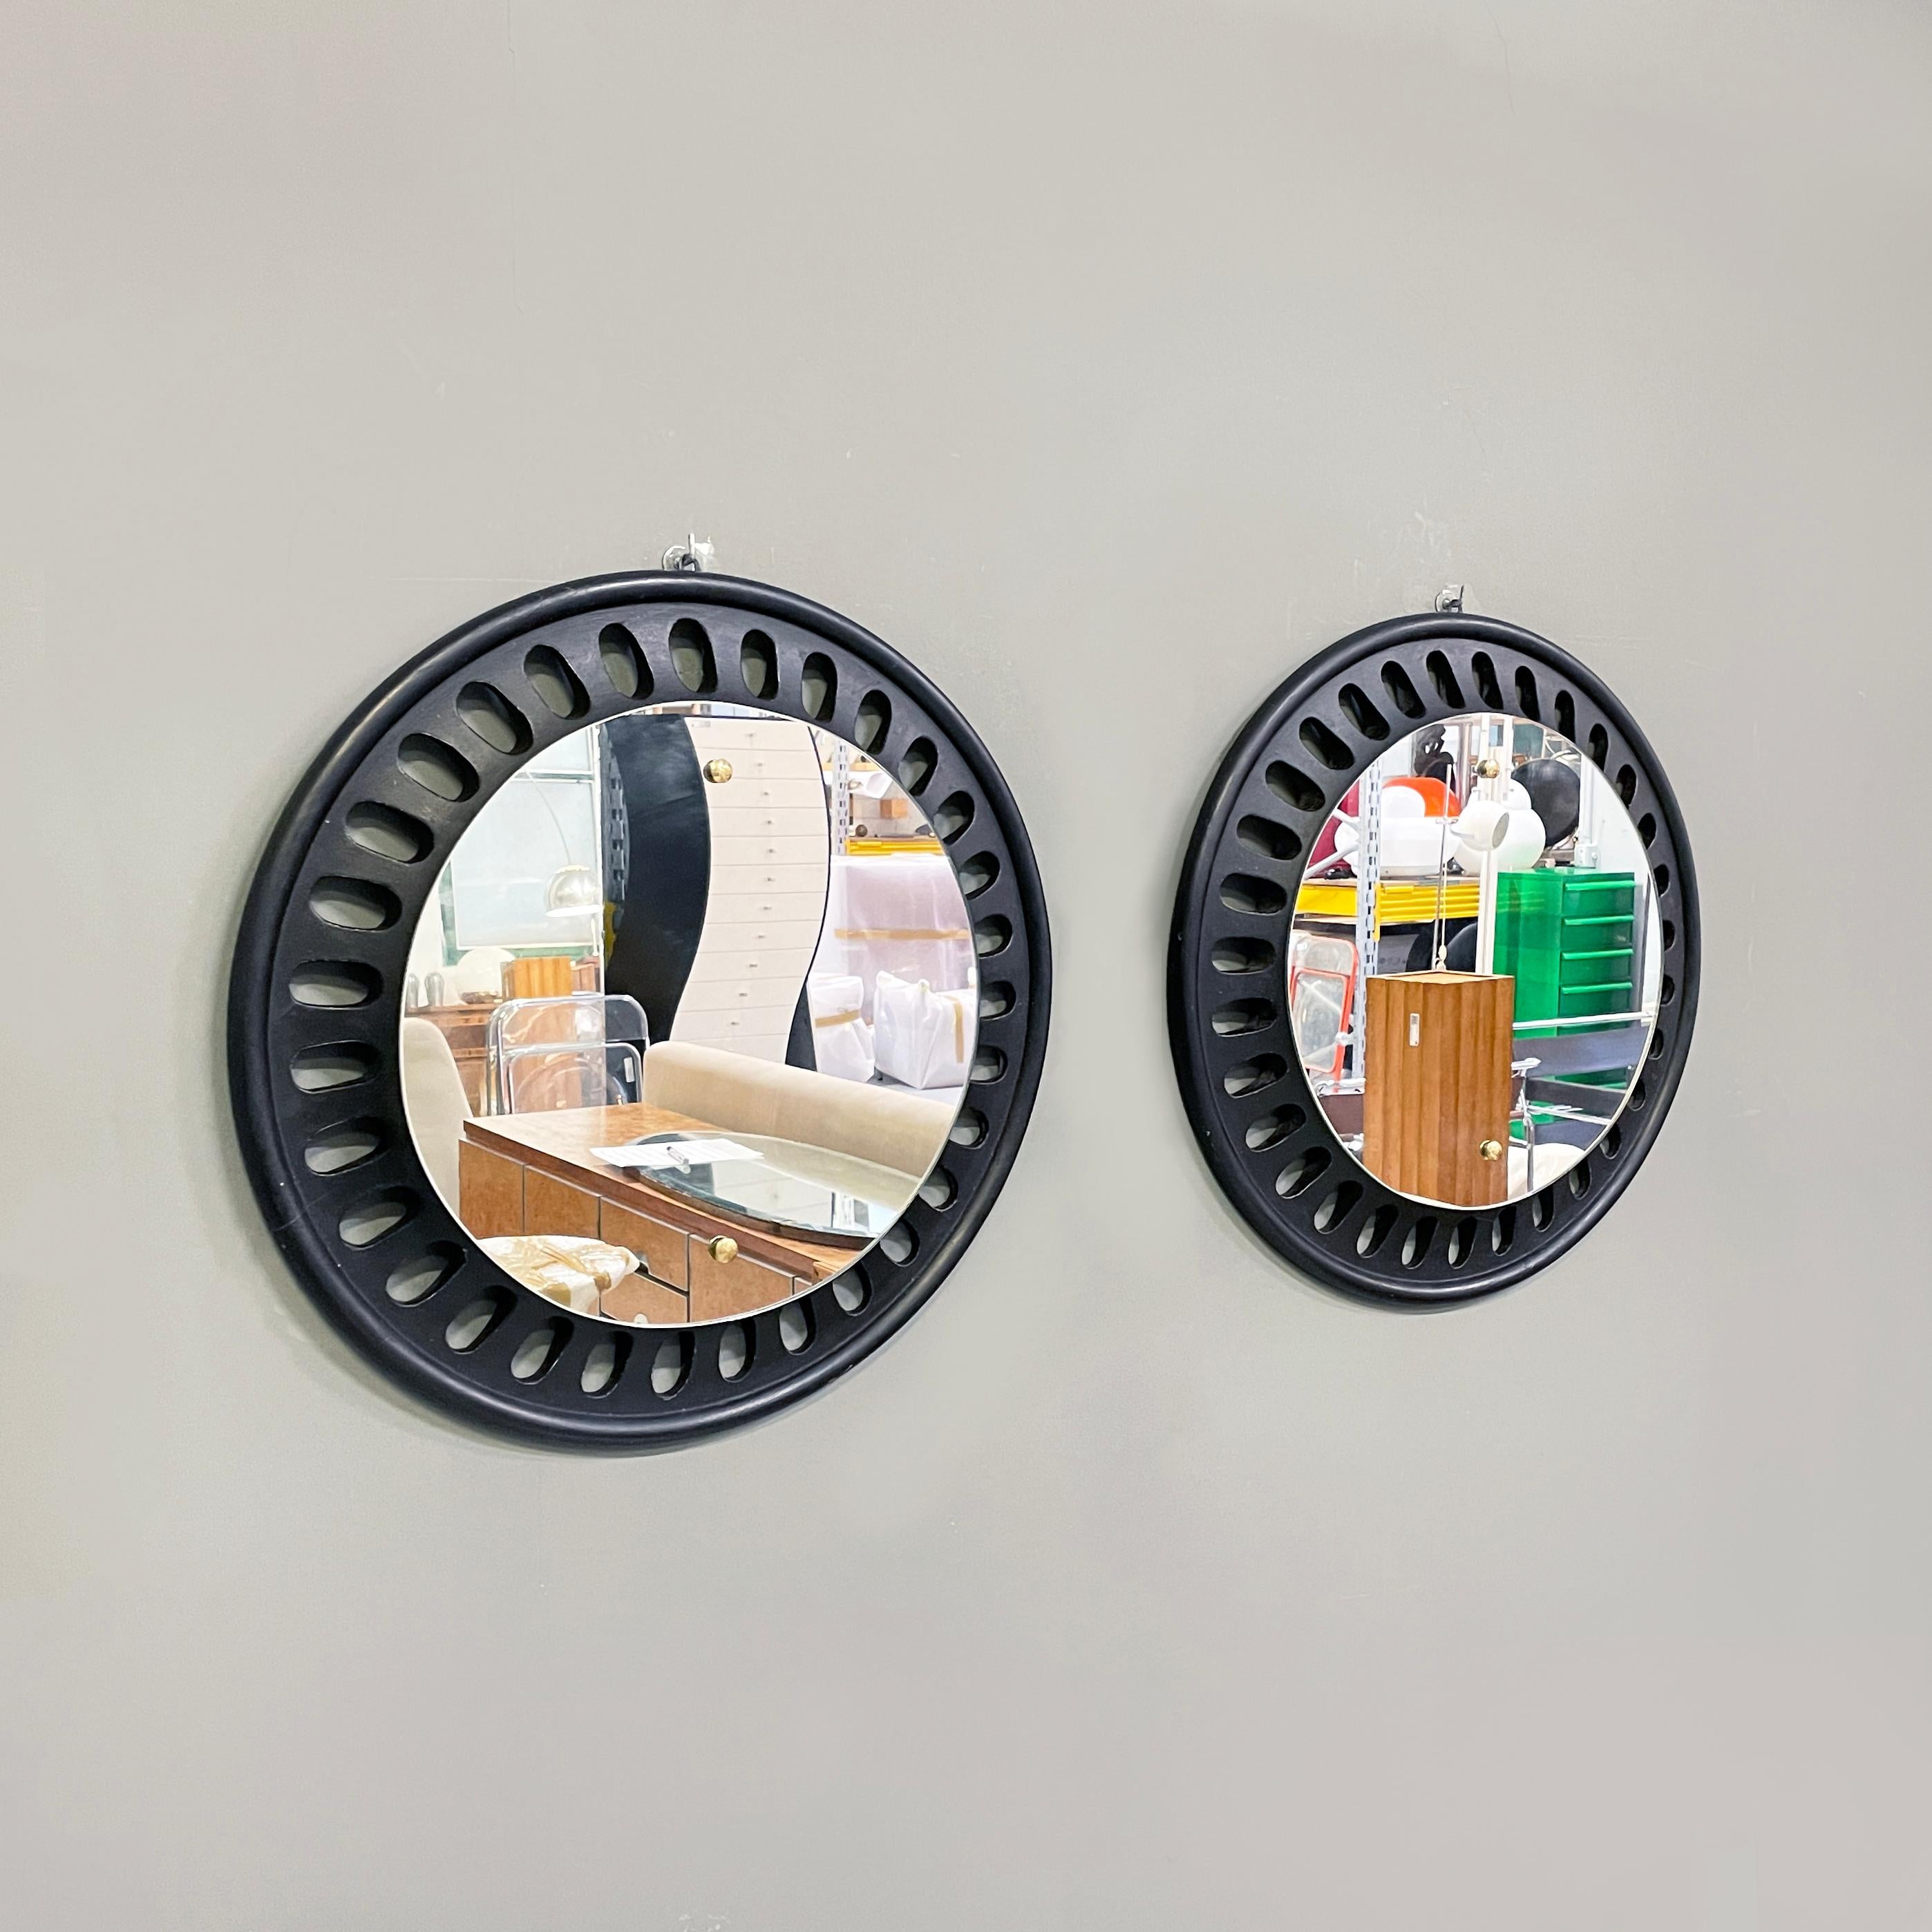 Italian Round wall mirrors in black wood, 20th century
Pair of round wall mirrors in black painted wood. The frame has oval decorations. Small brass buttons on the mirror. 
20th century.
Good condition, light marks on the wood. The brass is in